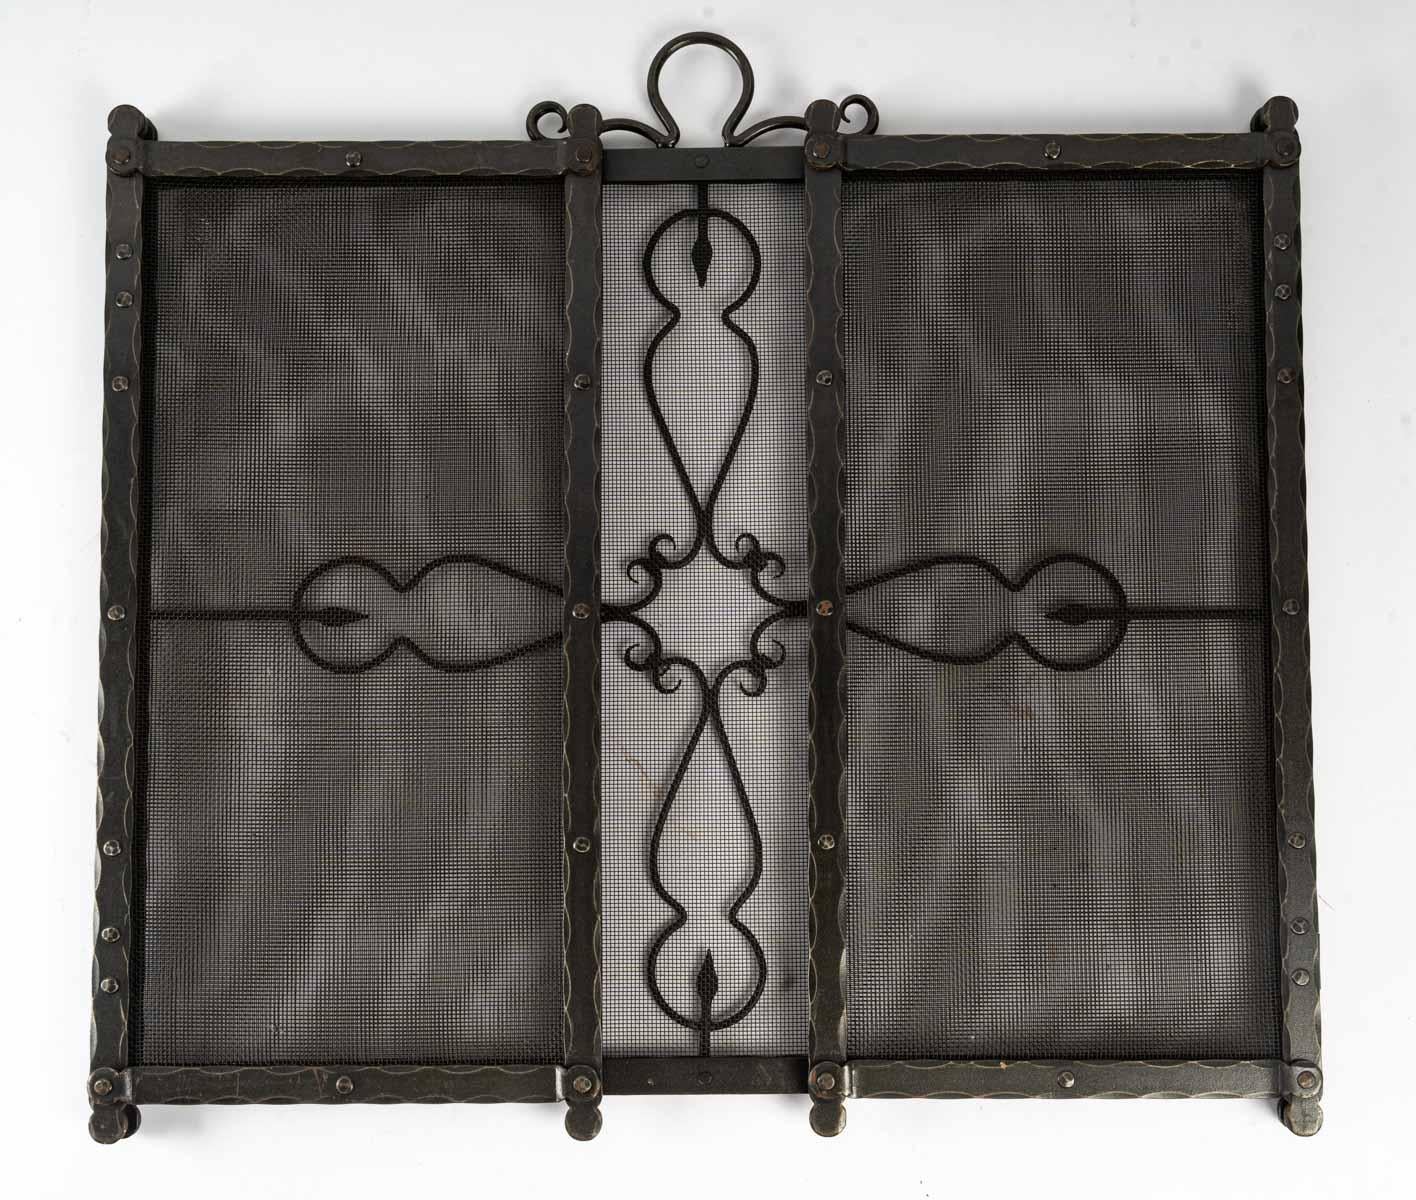 Wrought iron fire screen, early 20th century.
Measures: Central - H: 56 cm, W: 60 cm;
Total - H: 56 cm, W: 107 cm